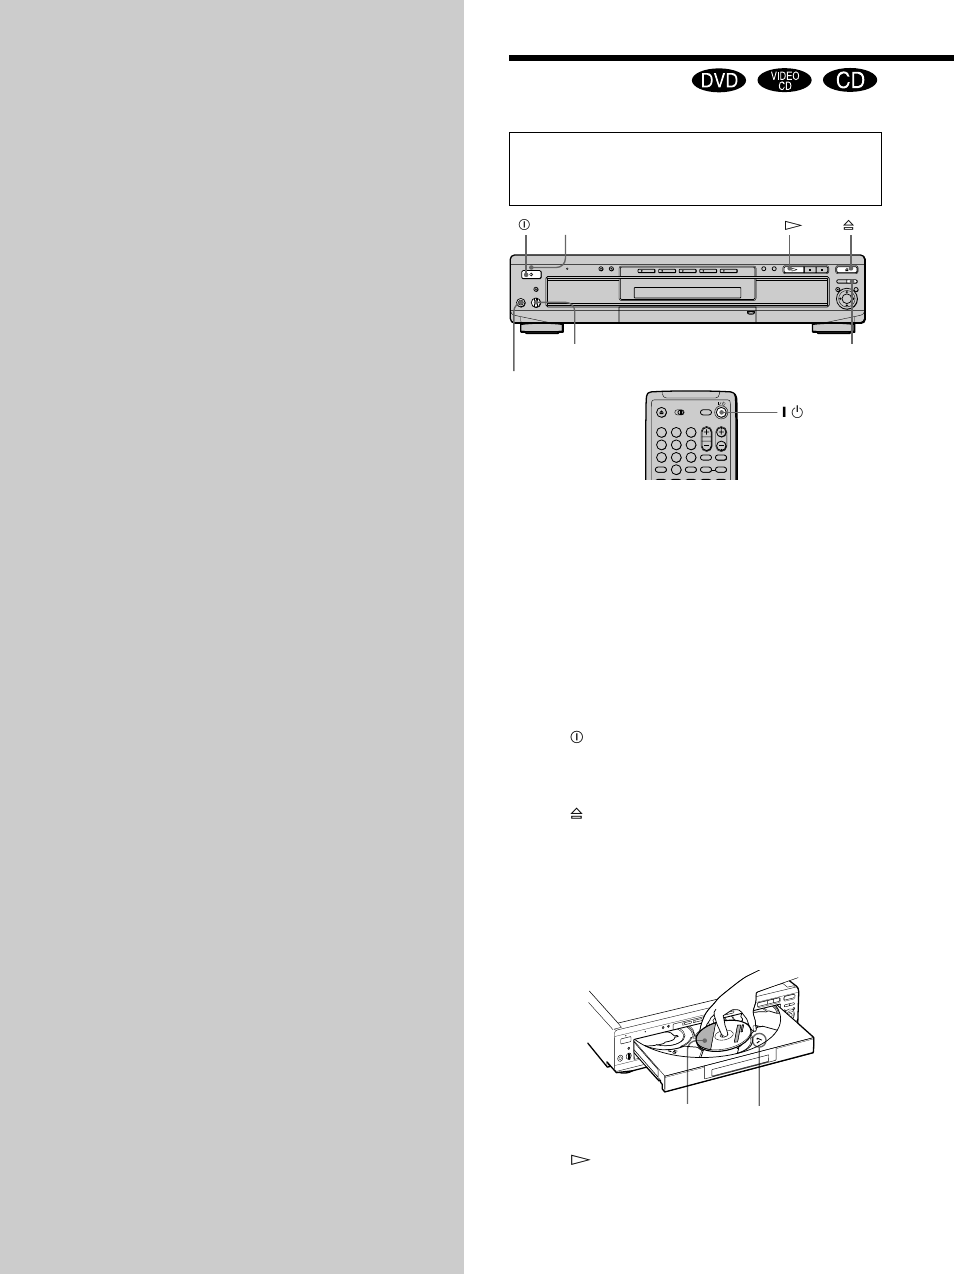 Playing discs | Sony DVP-C670D User Manual | Page 16 / 88